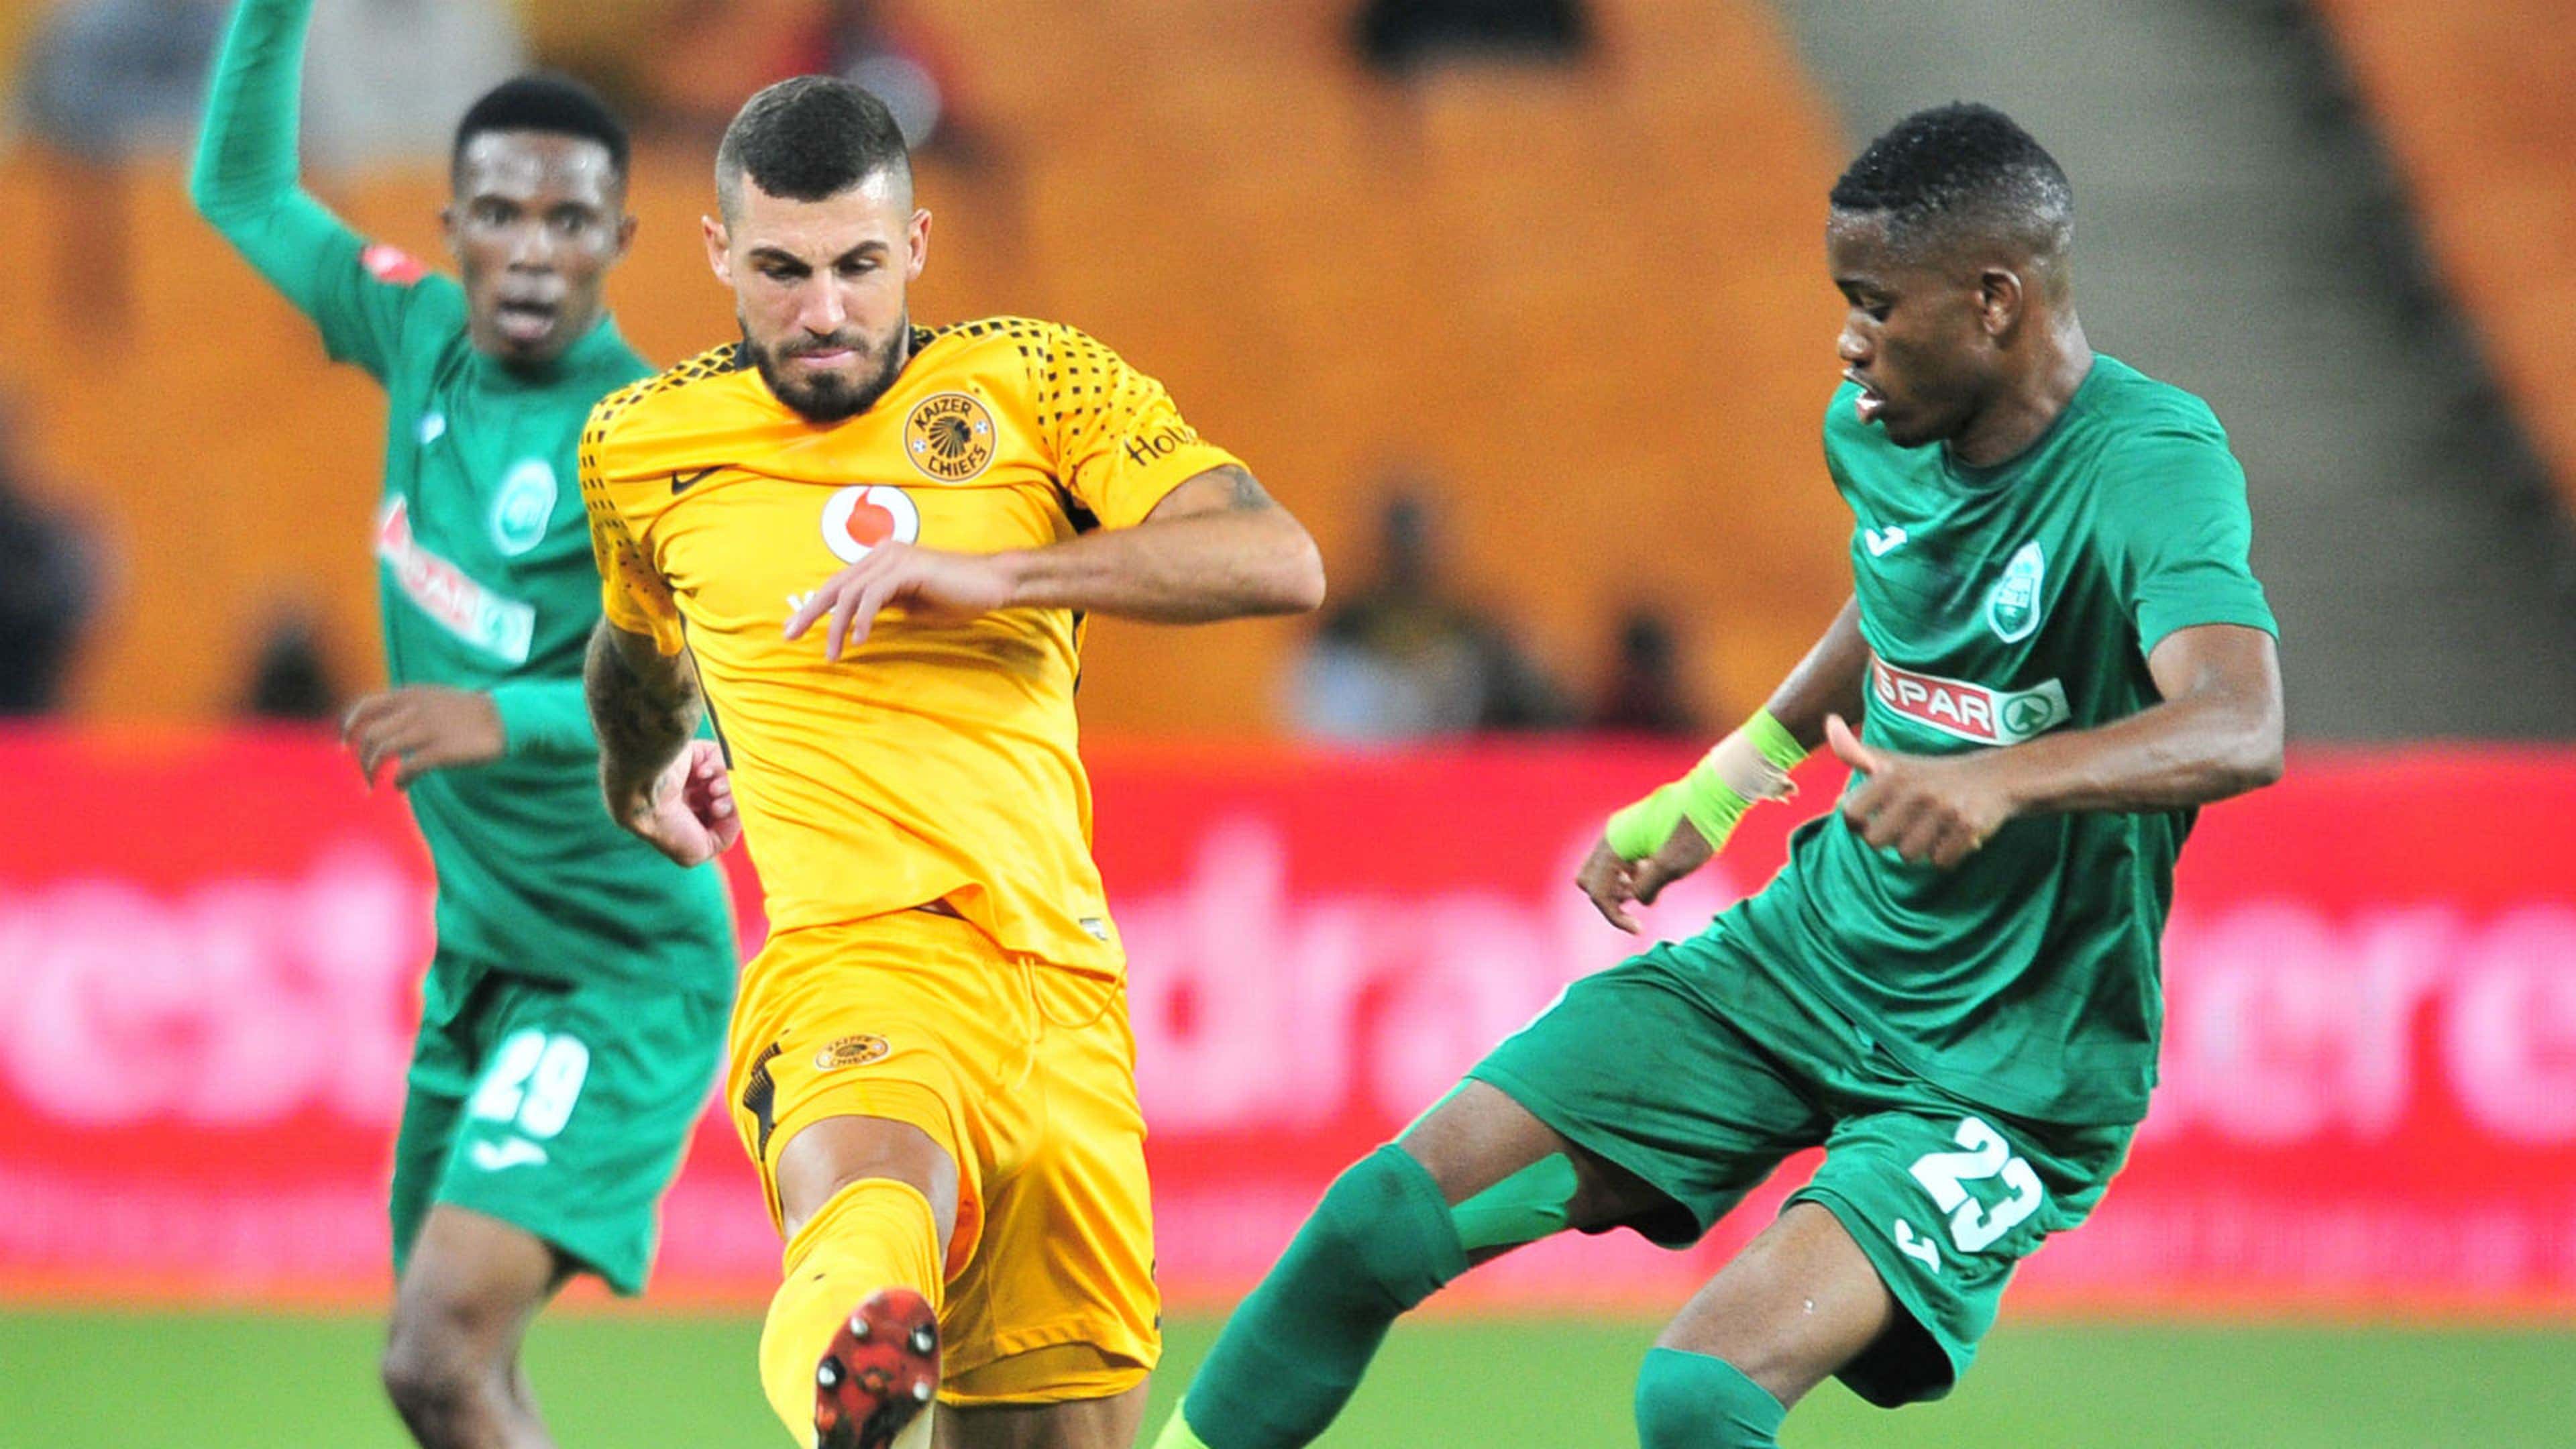 Kaizer Chiefs vs AmaZulu Preview: Kick-off time, TV channel